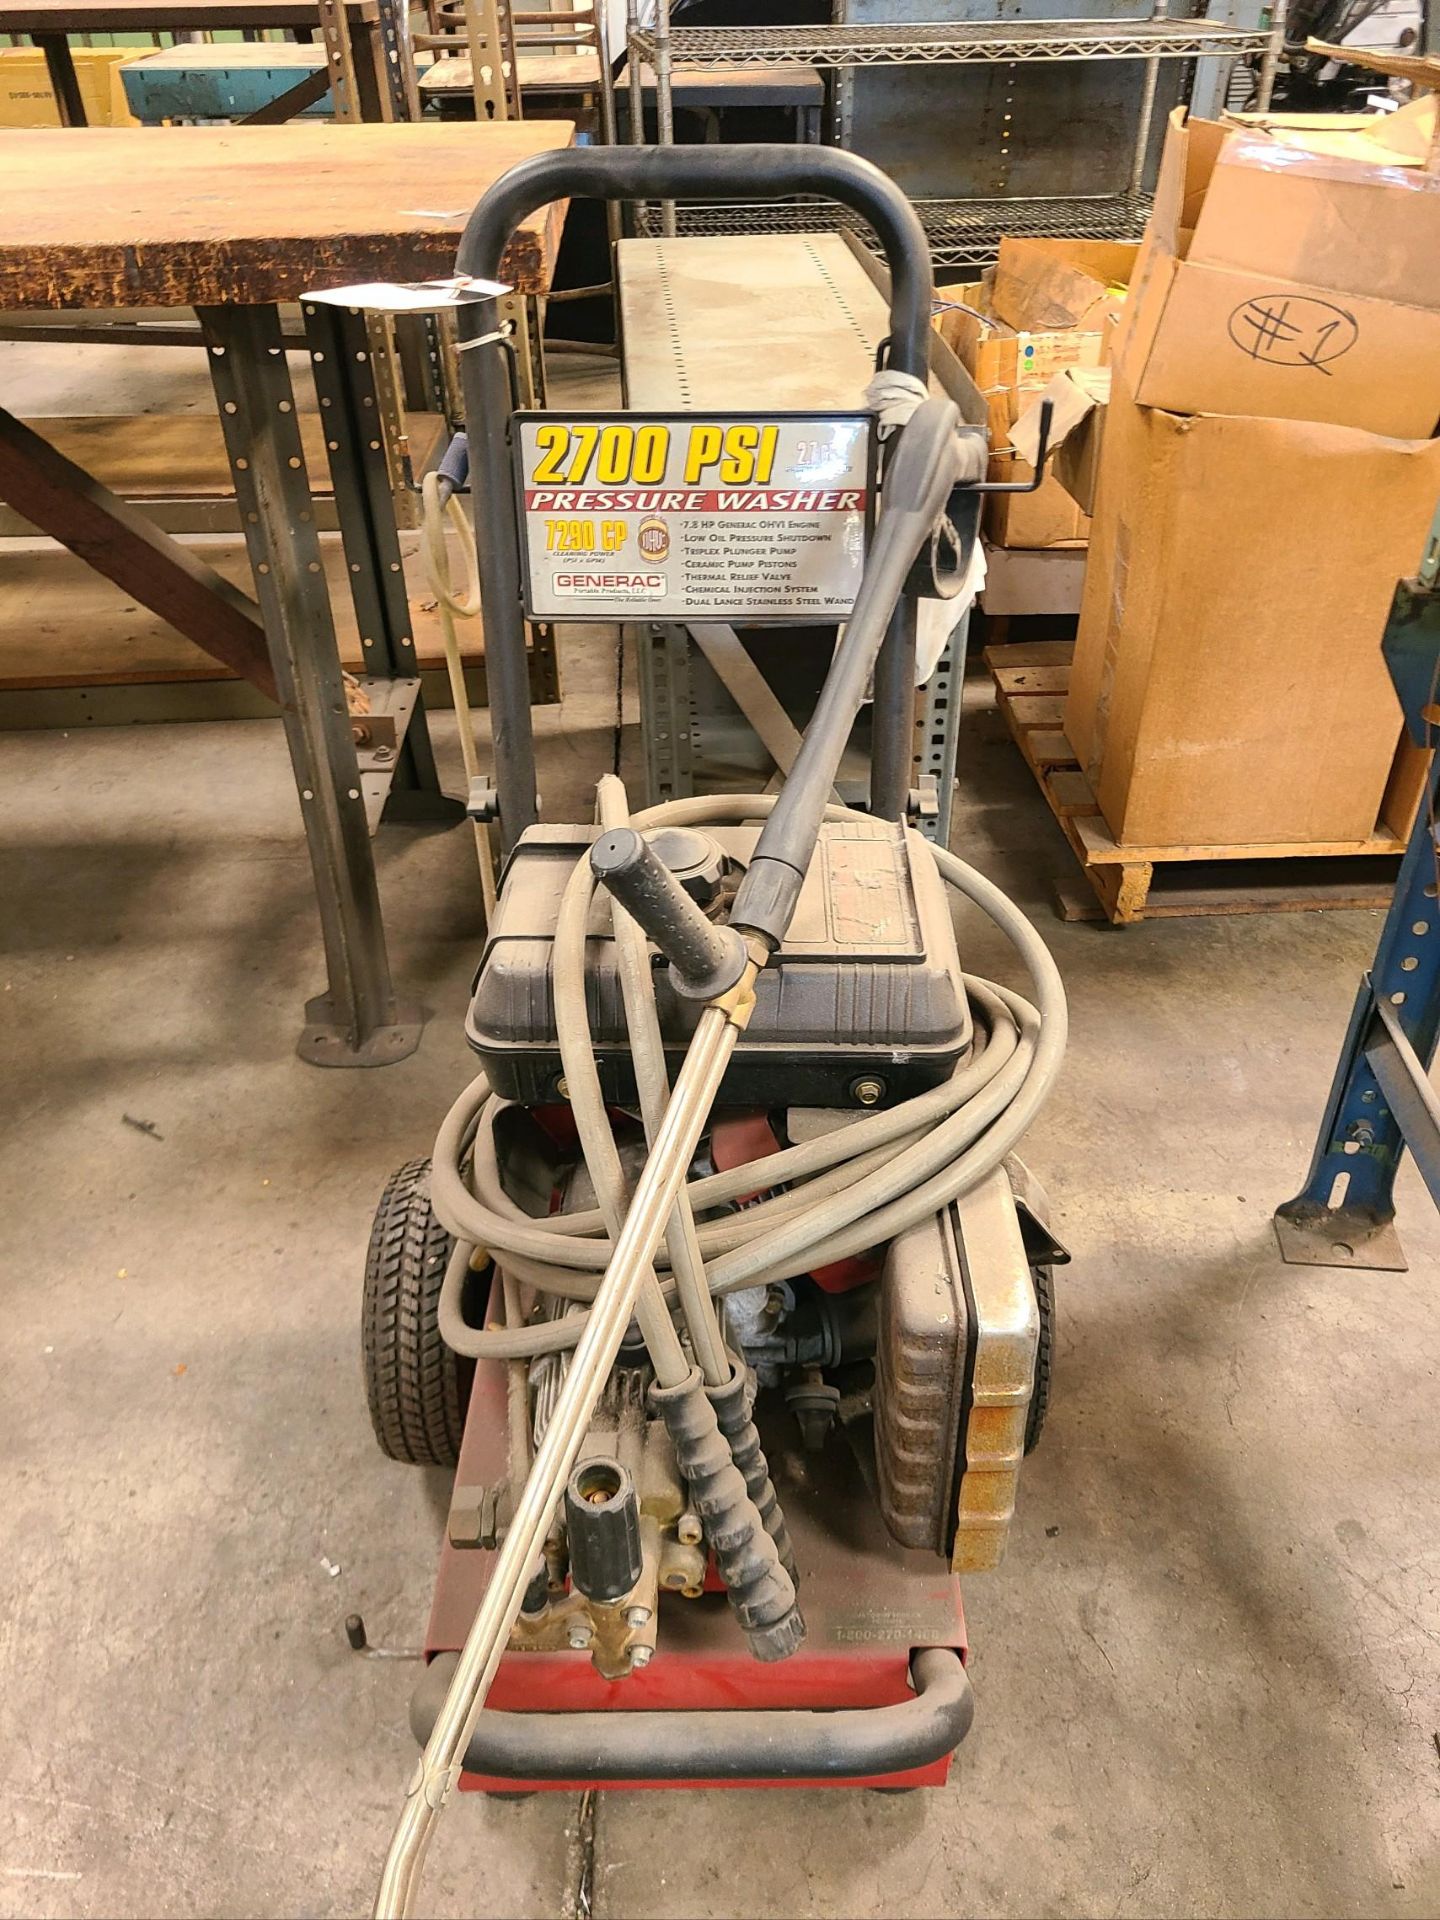 Generac 2700psi Pressure Washer (SOLD AS-IS - NO WARRANTY)